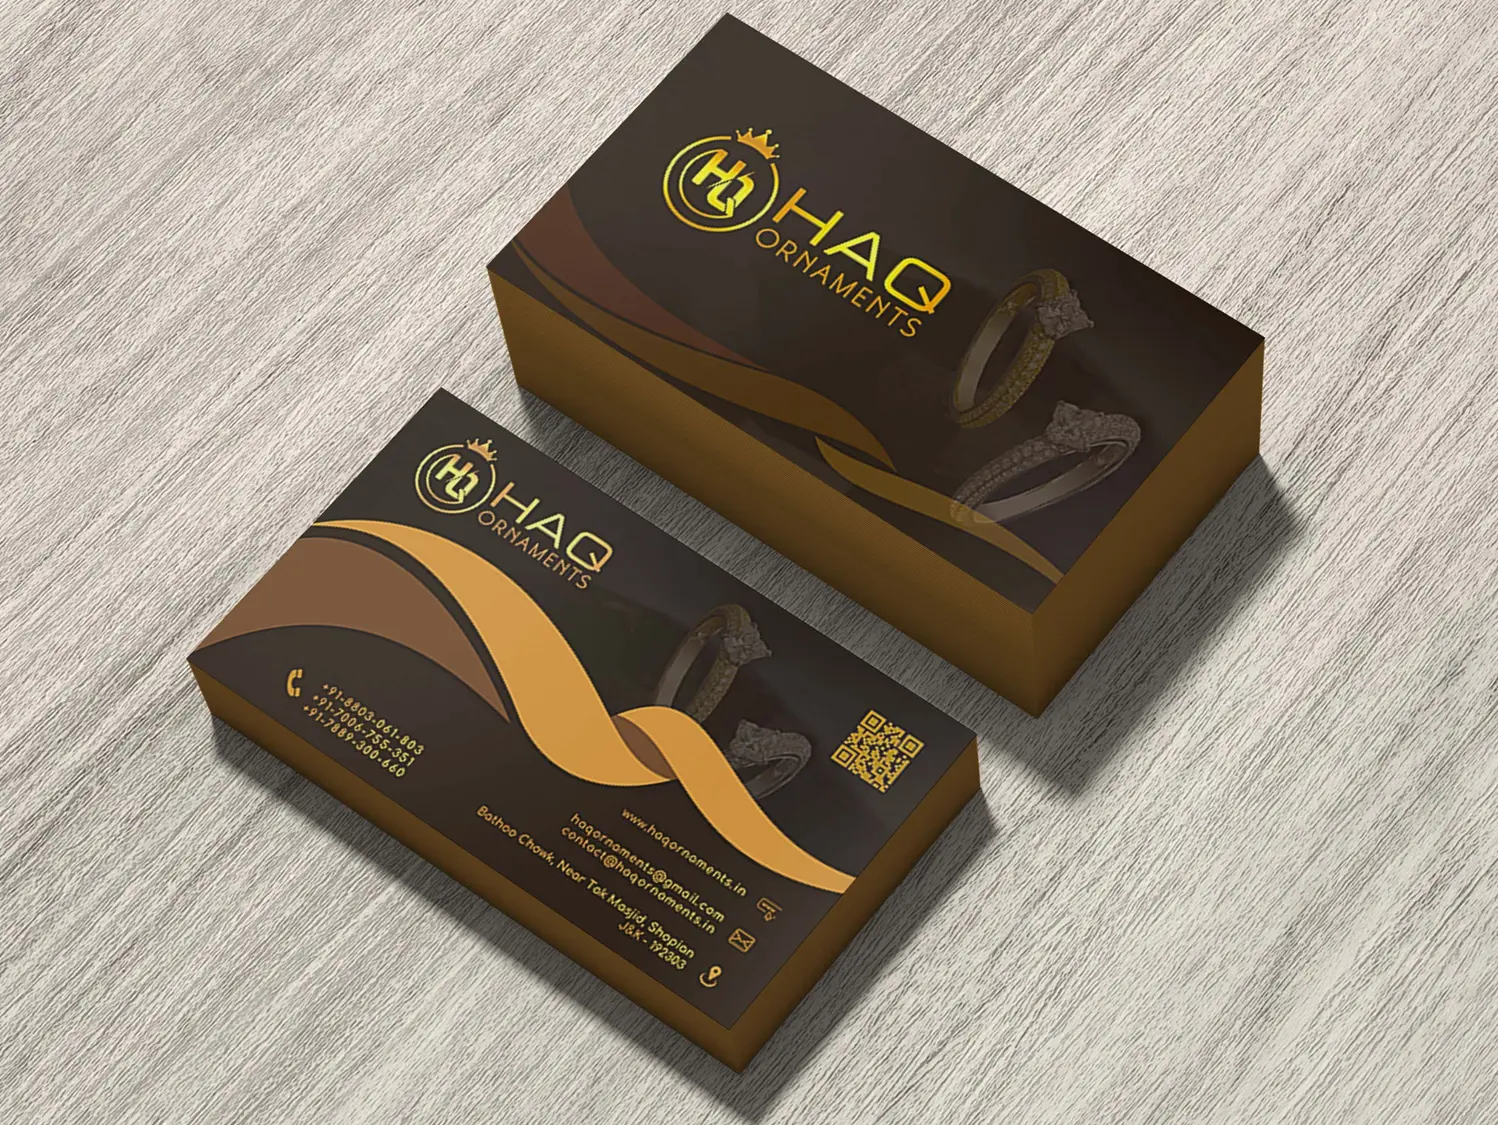 Haq Ornaments Business Card Mockup-By Acmo Network 2 (2)